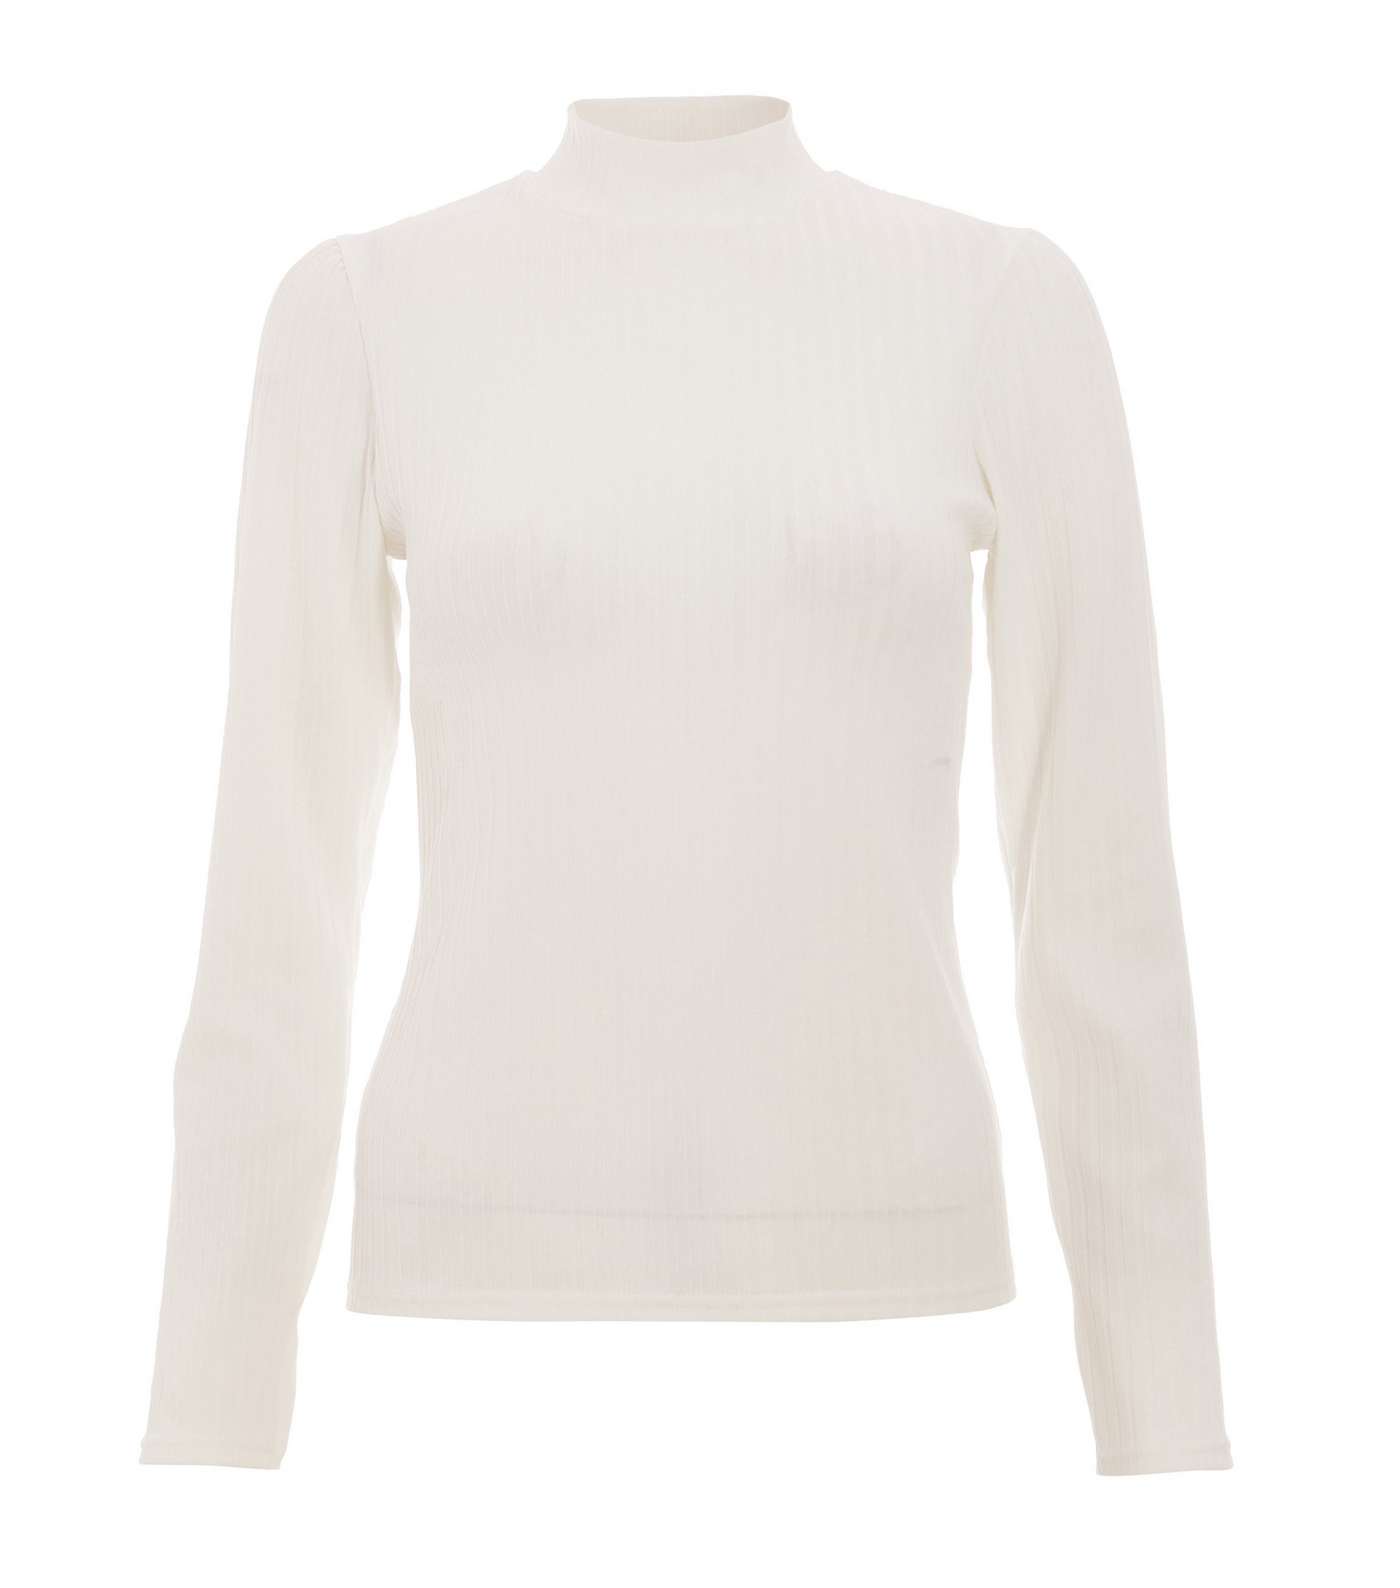 QUIZ Cream Ribbed Knit High Neck Top Image 4